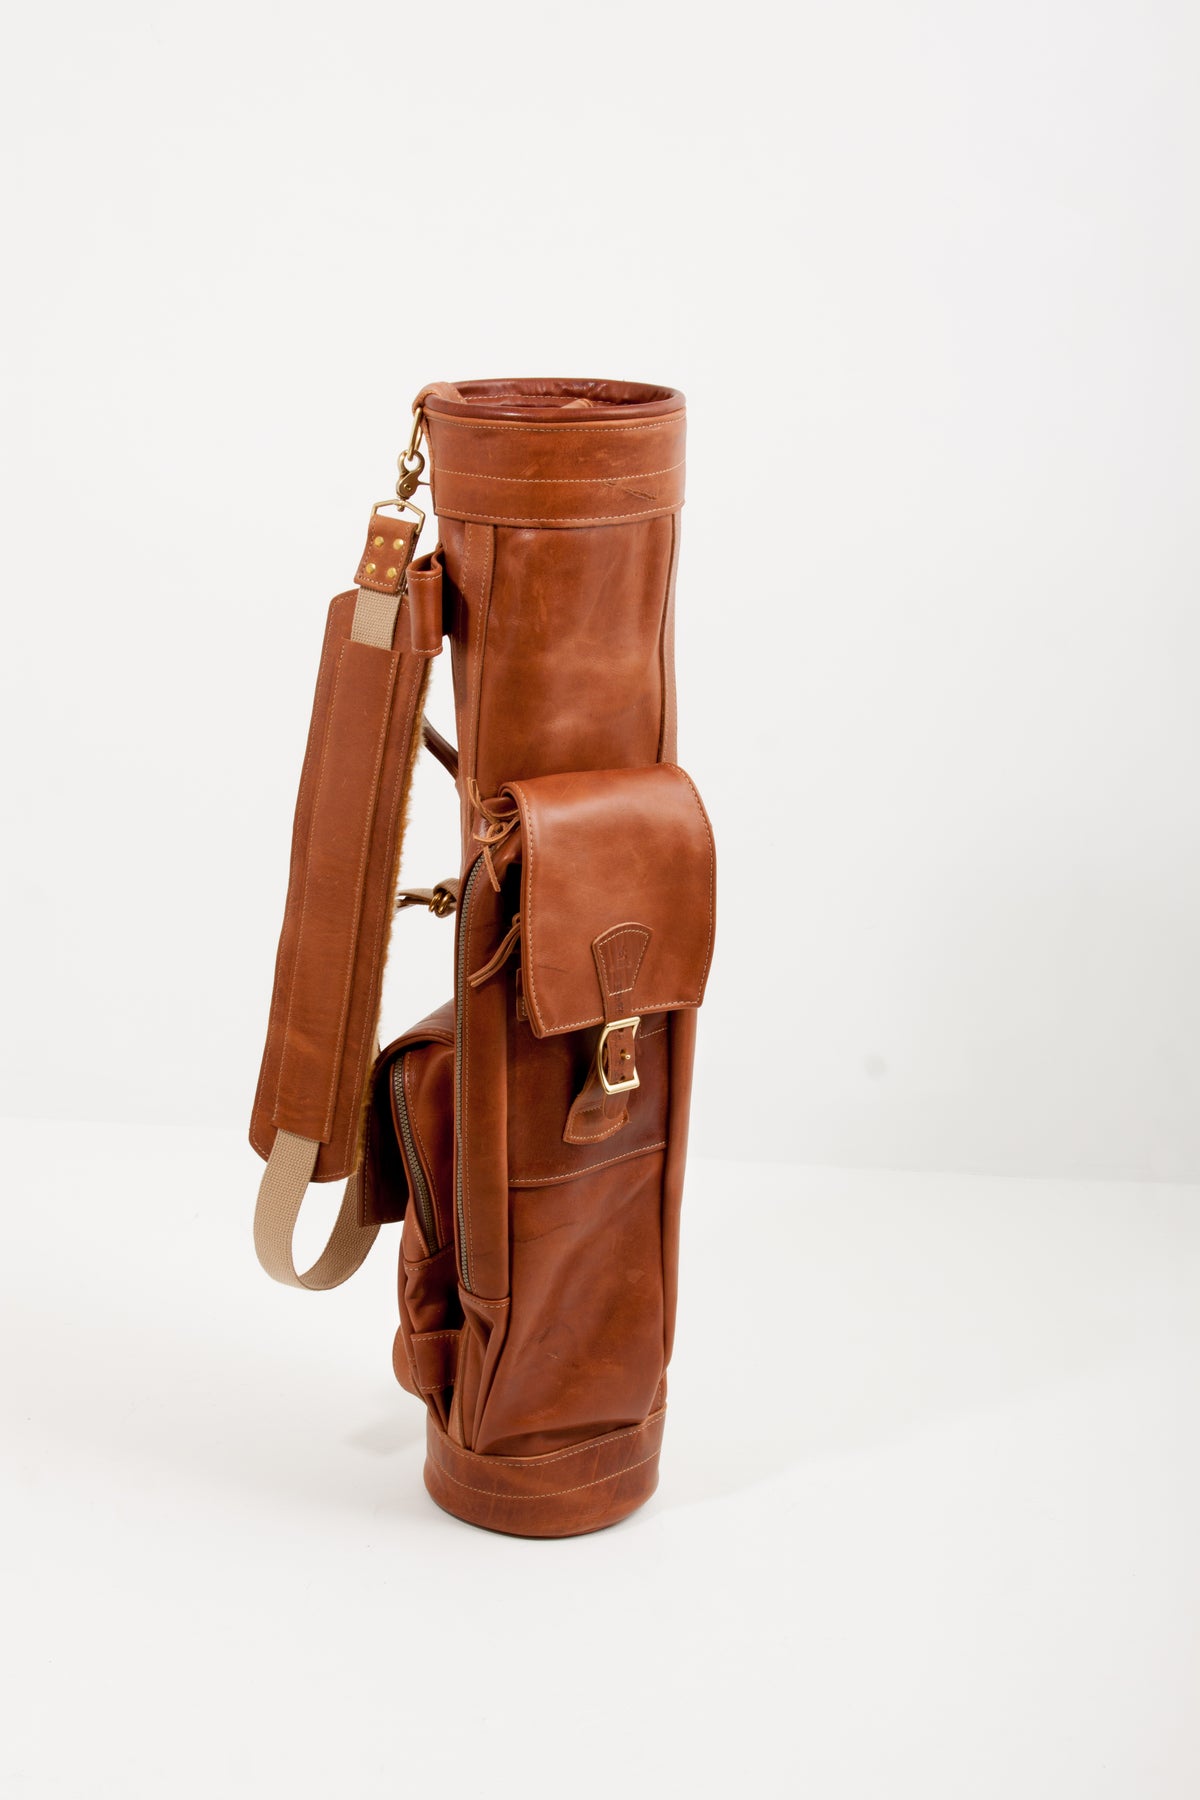 Custom Premium Leather Airliner Style Golf Bag - Steurer & Jacoby